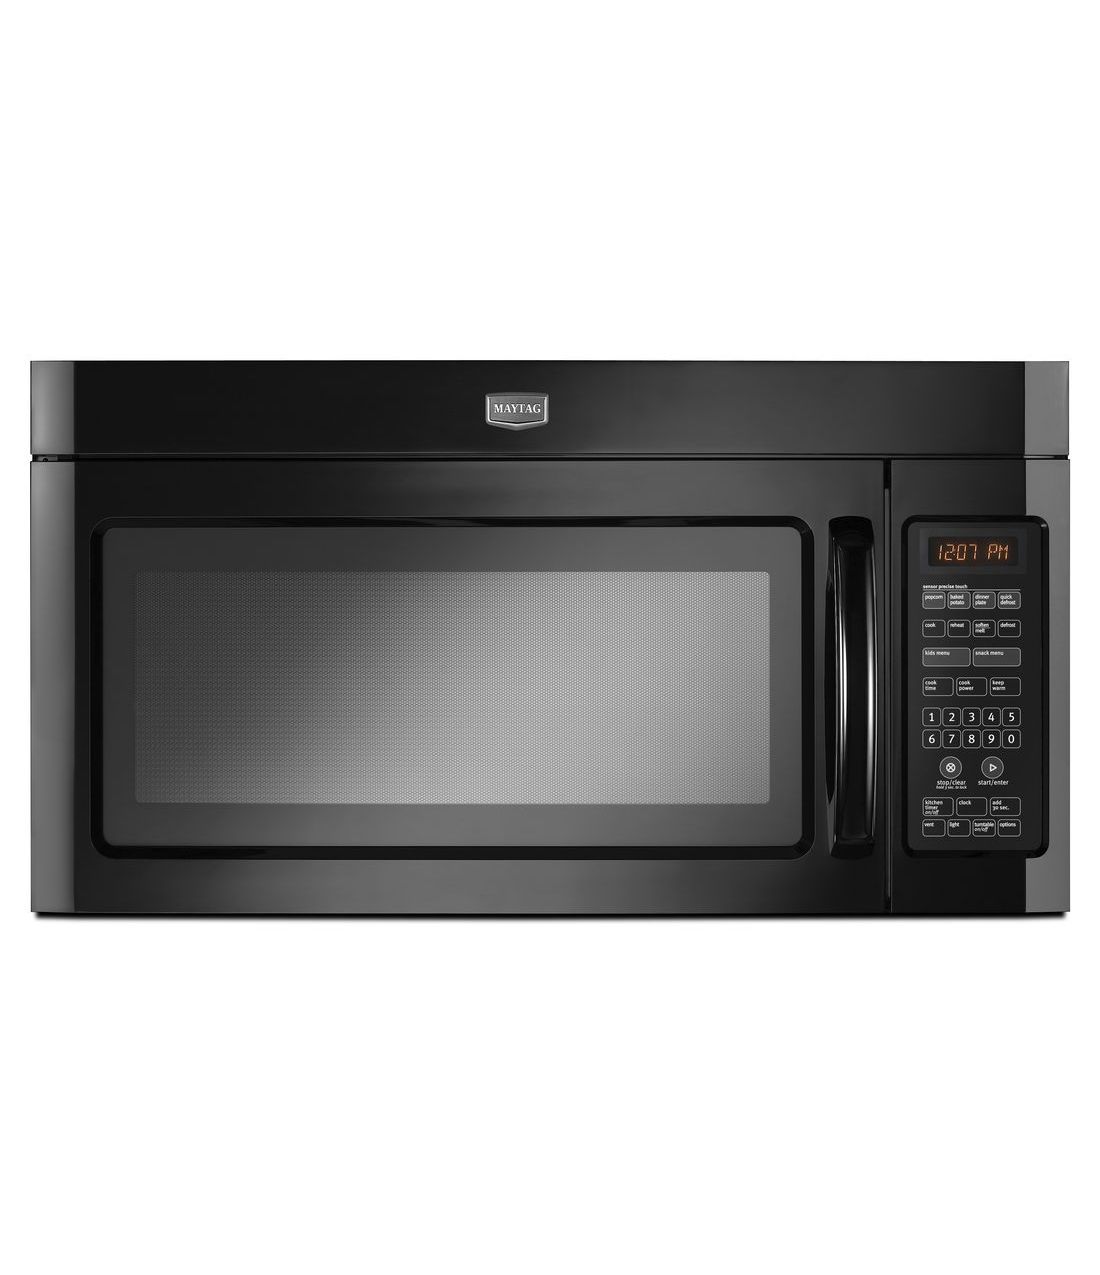 Maytag MMV4206BB 2.0 cu. ft. OverTheRange Microwave with 1000 Watts, 10 Power Levels, Hidden